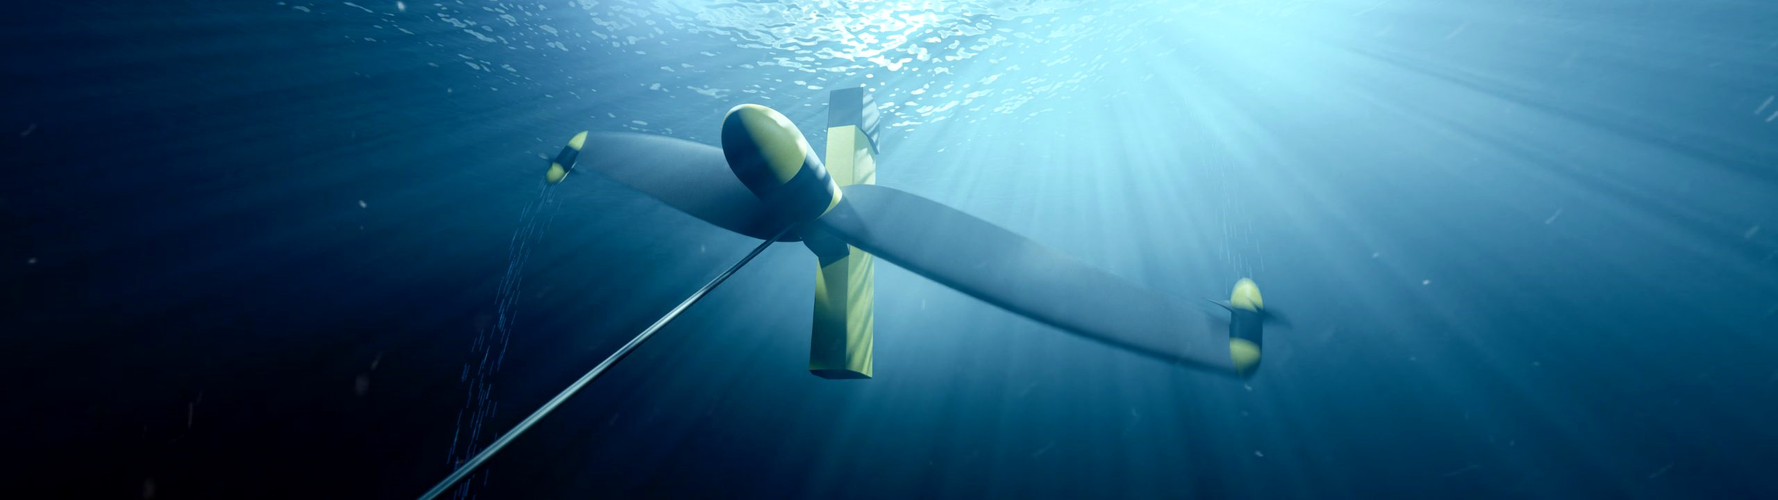 Concept for Equinox Ocean Turbines technology (Courtesy of Equinox Ocean Turbines)